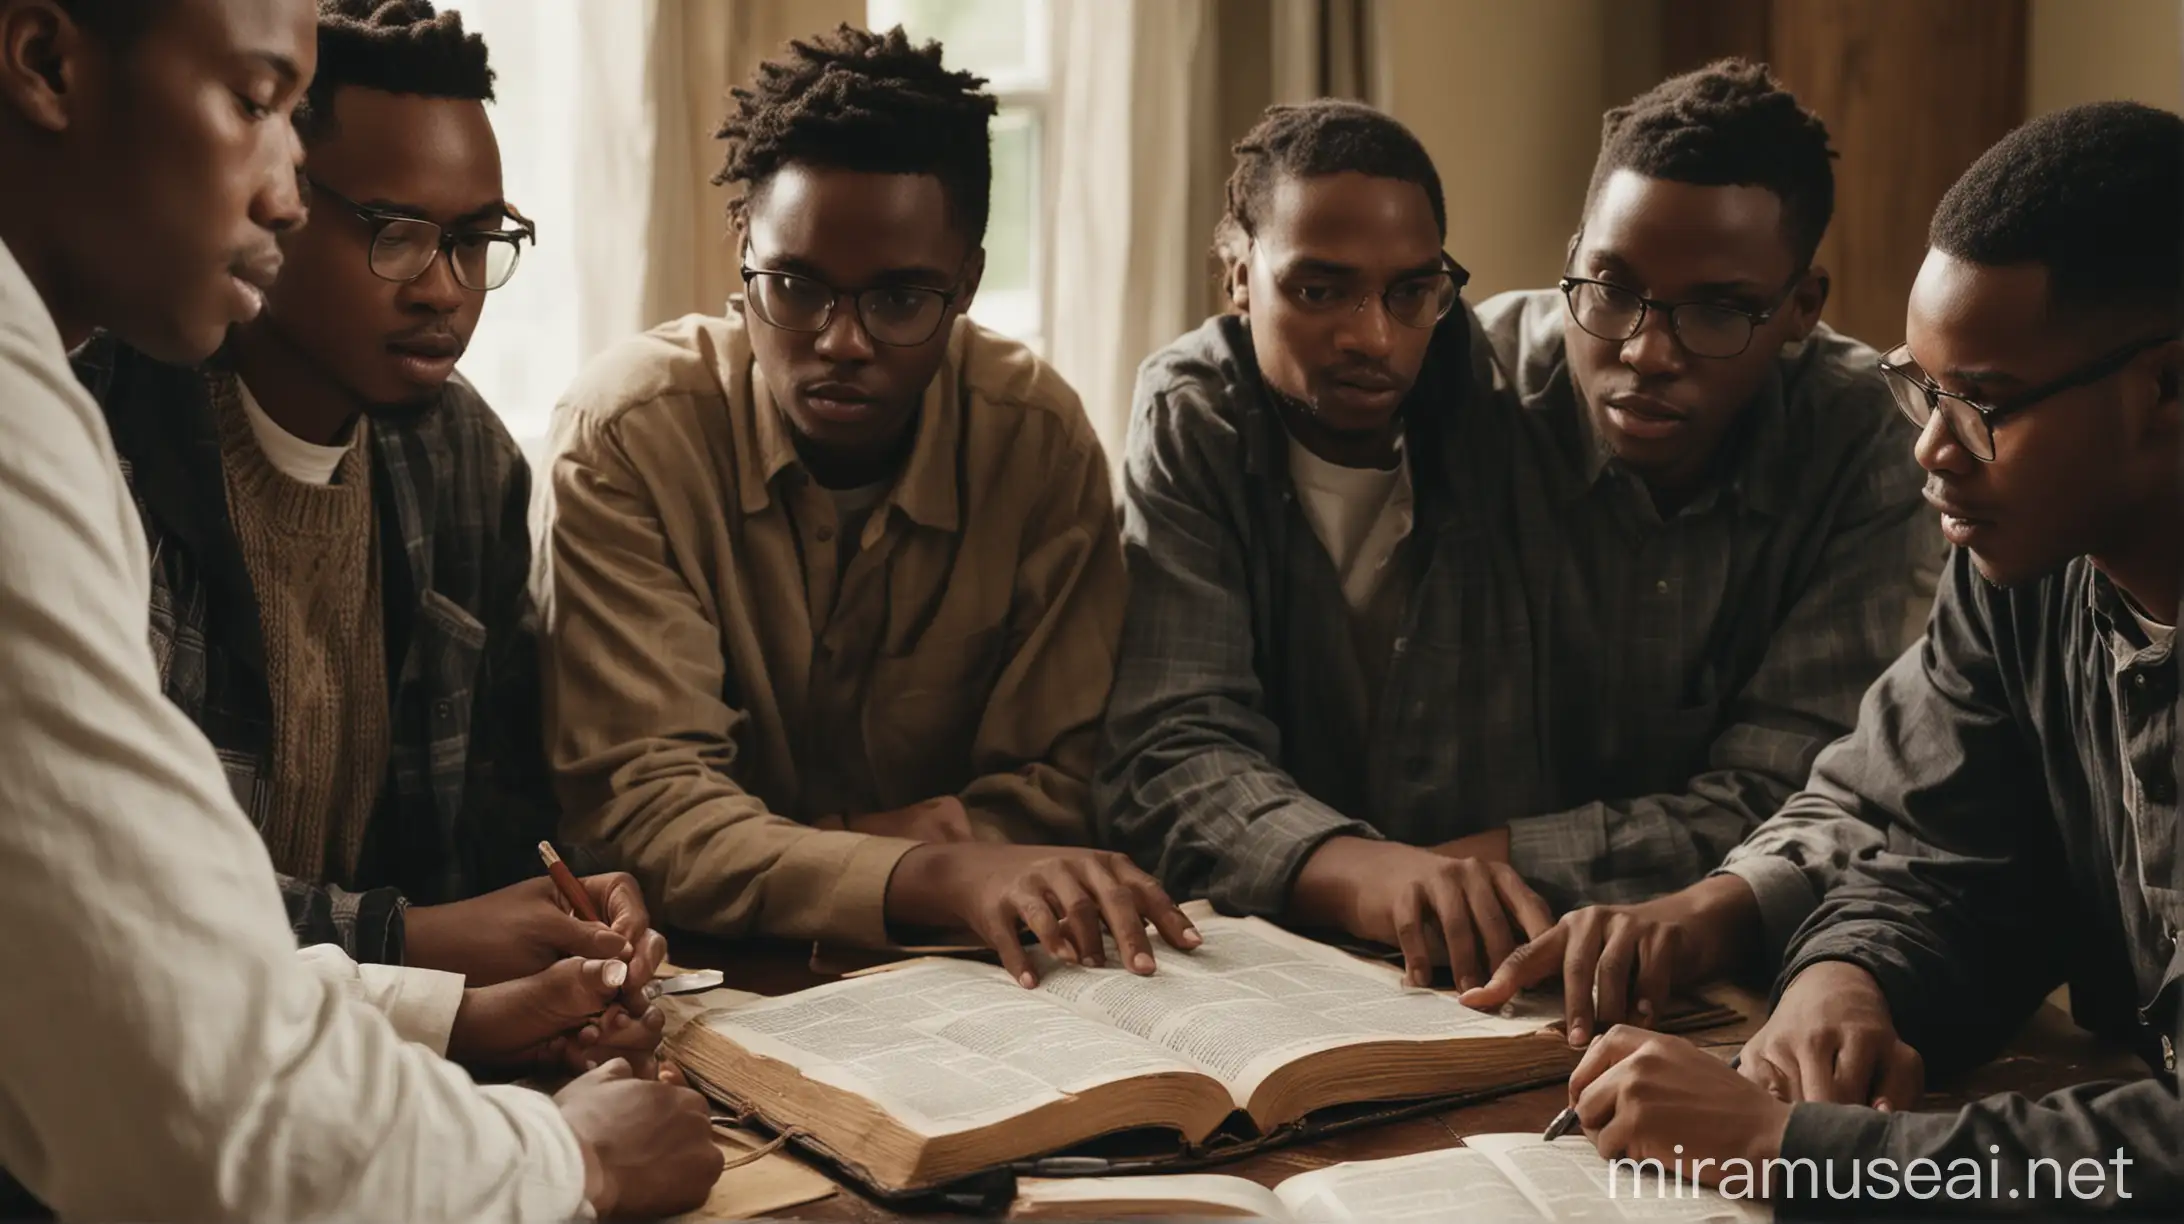 Group of African Americans Studying Bible Together